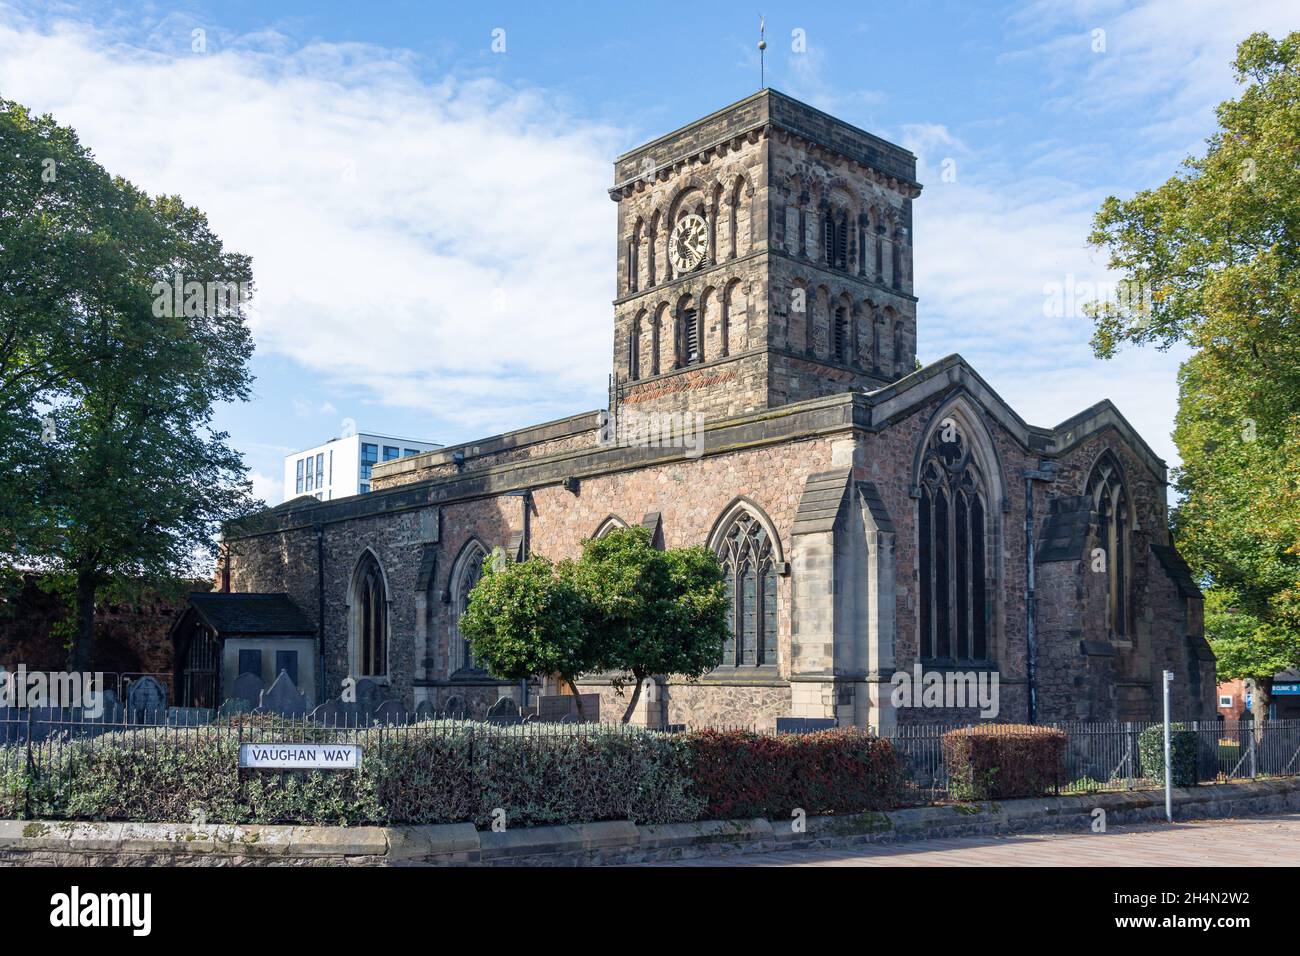 St Nicholas Church, Vaughan Way, City of Leicester, Leicestershire, Inghilterra, Regno Unito Foto Stock